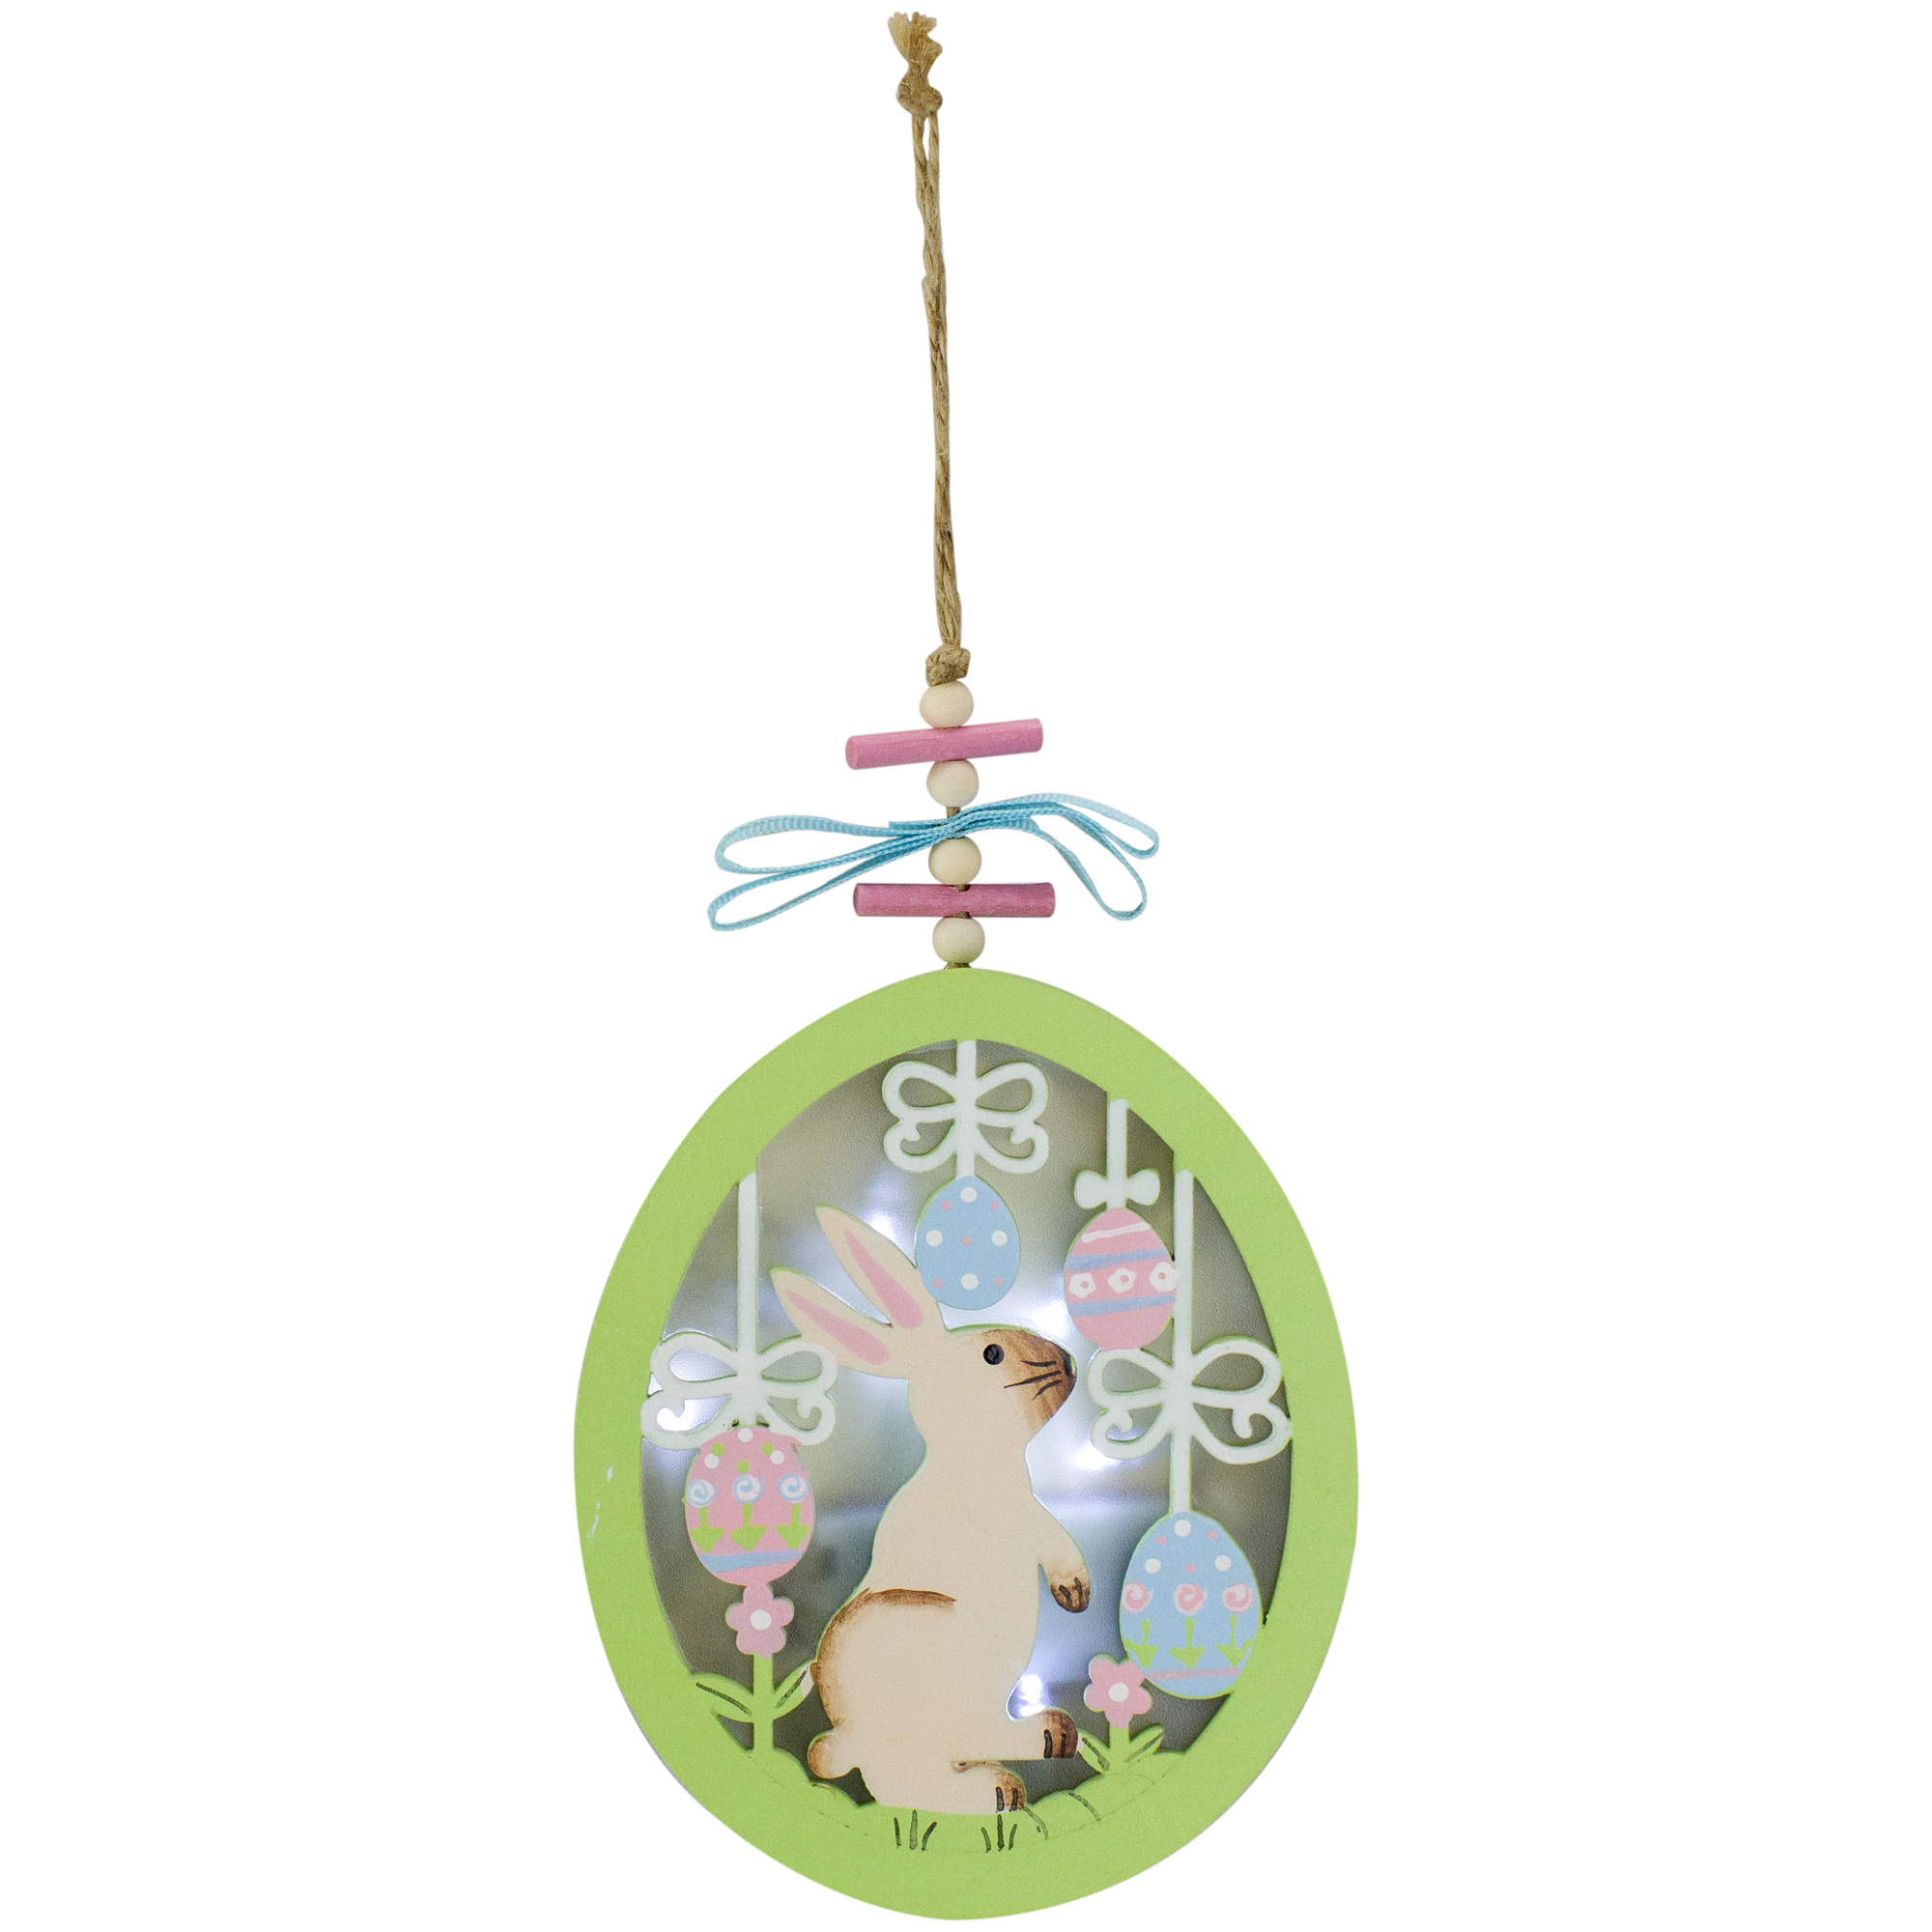 Gallerie II 5.9" Wooden  Easter Eggs and Bunny LED Shadow Box Ornament Battery Operated - image 1 of 3